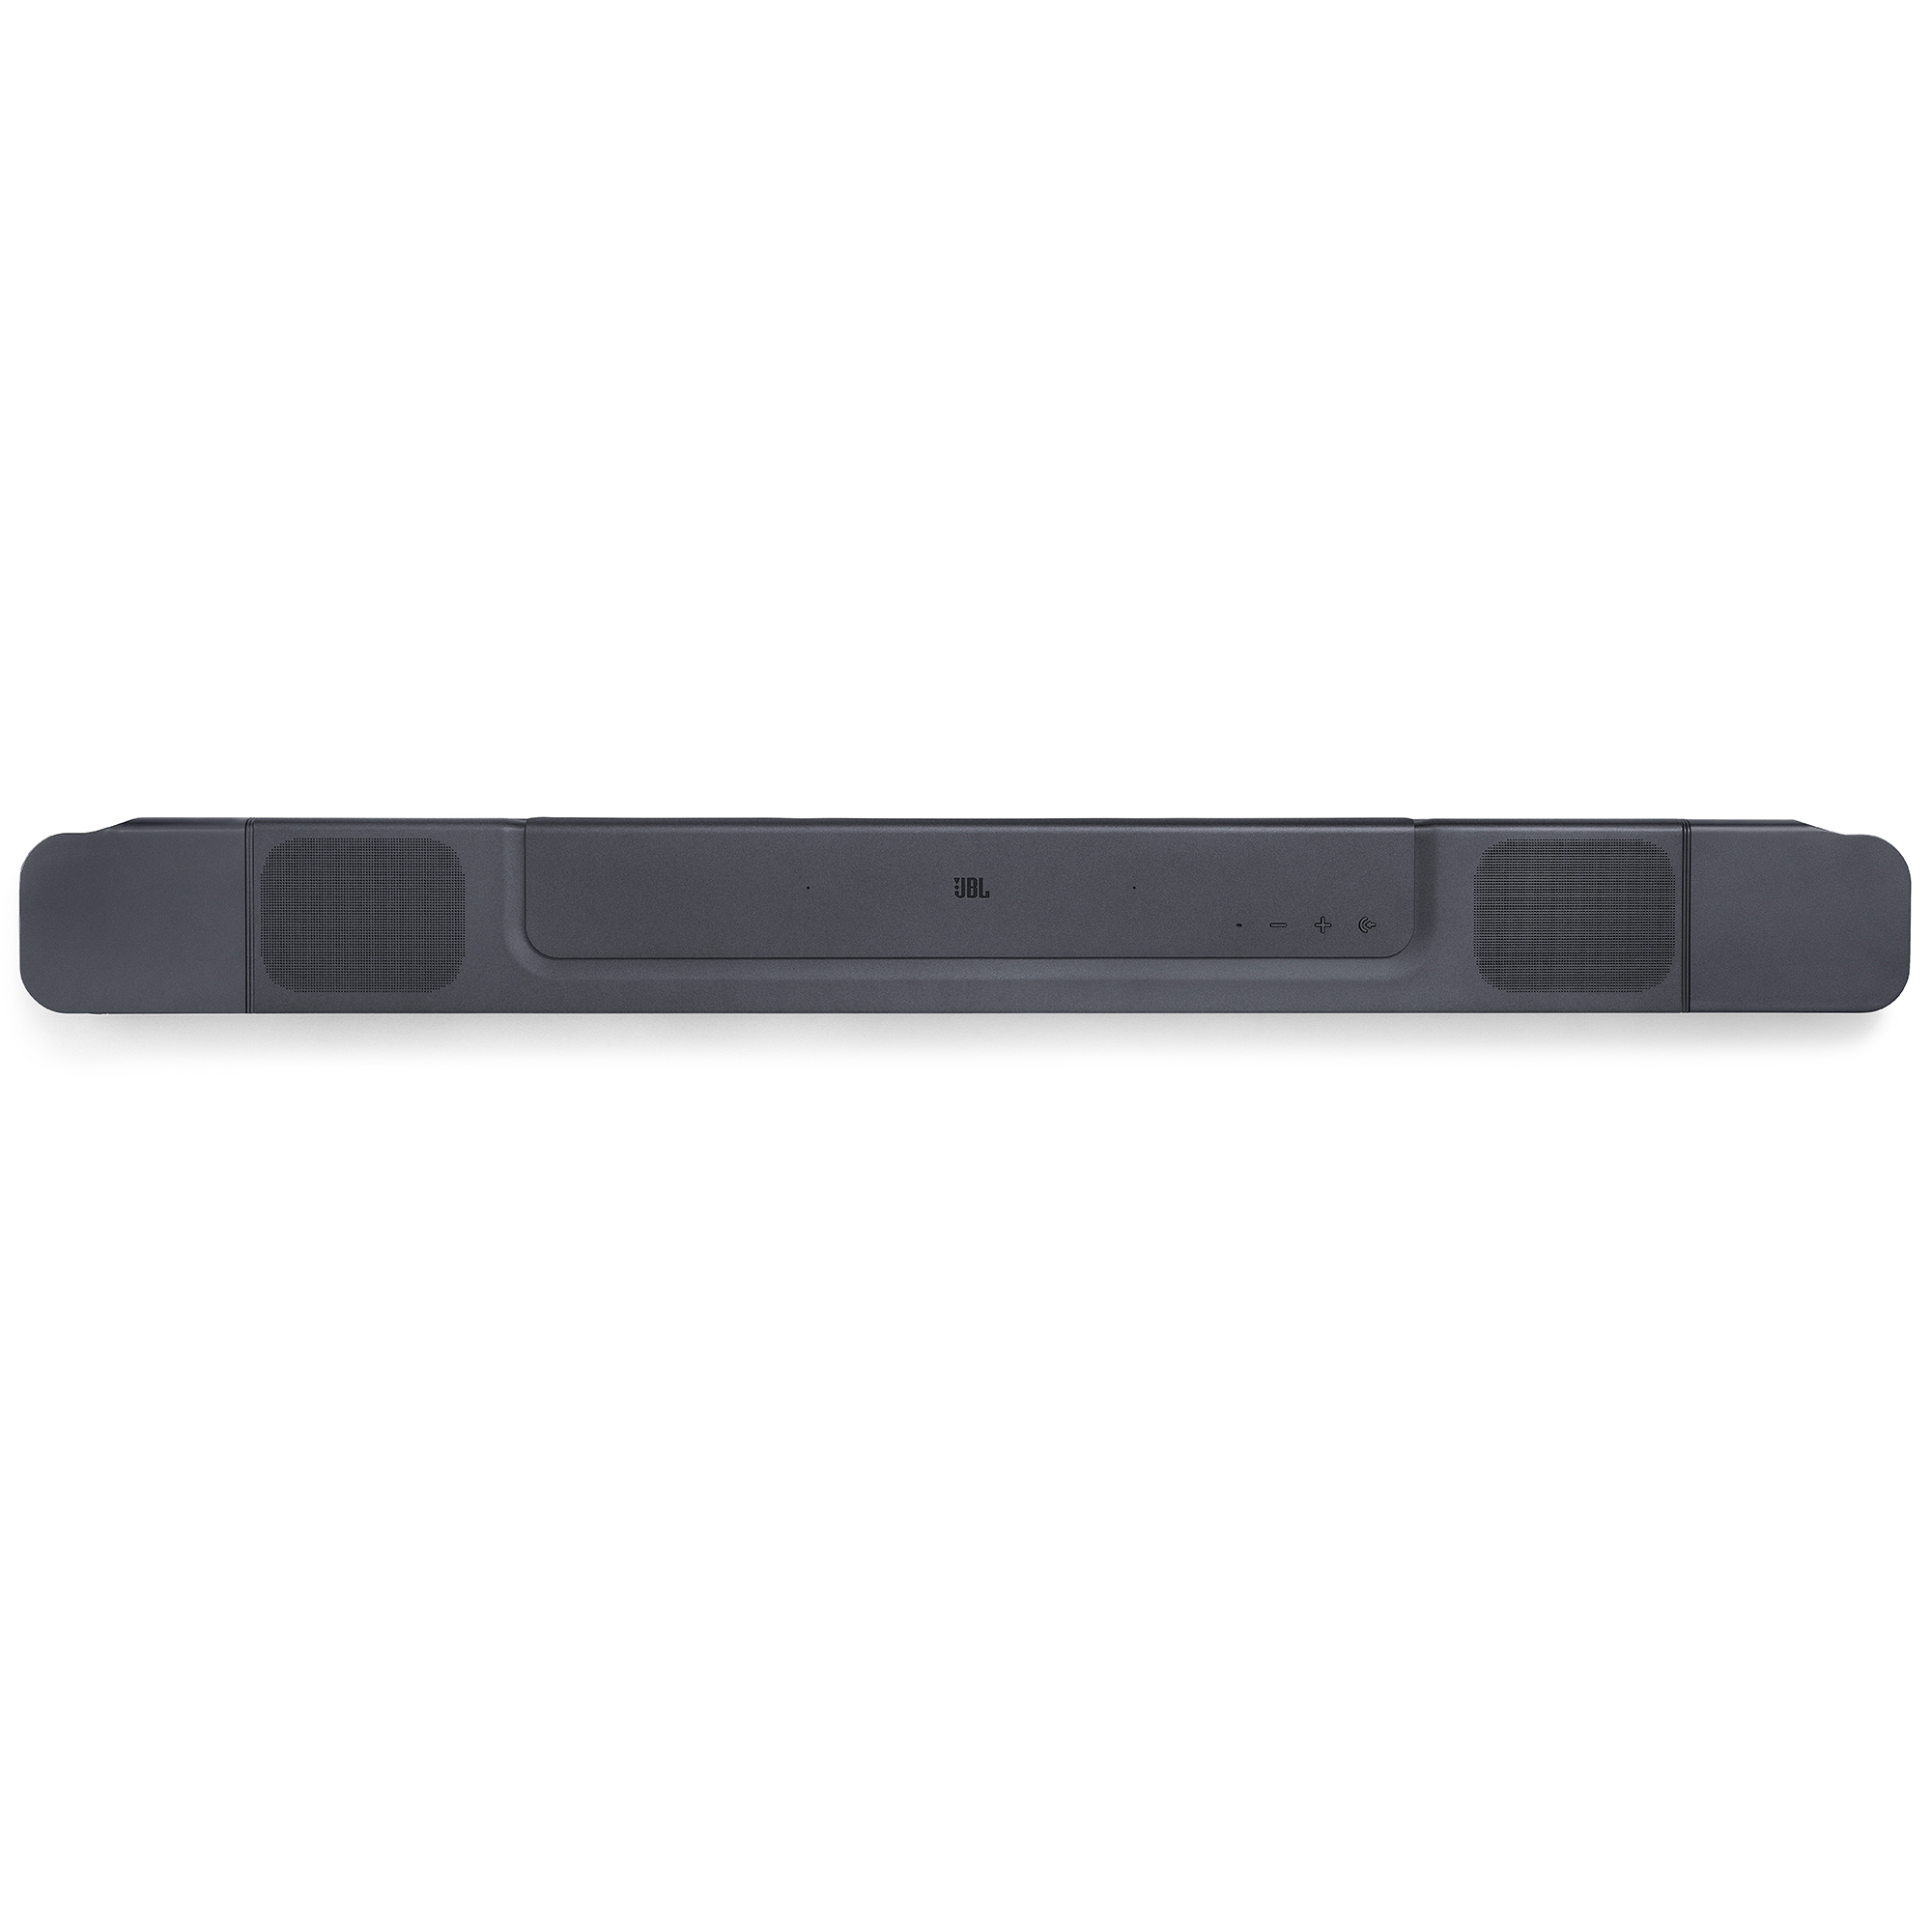 JBL BAR 800 PRO 5.1.2-Channel Soundbar with Detachable Surround Speakers and Dolby Atmos®